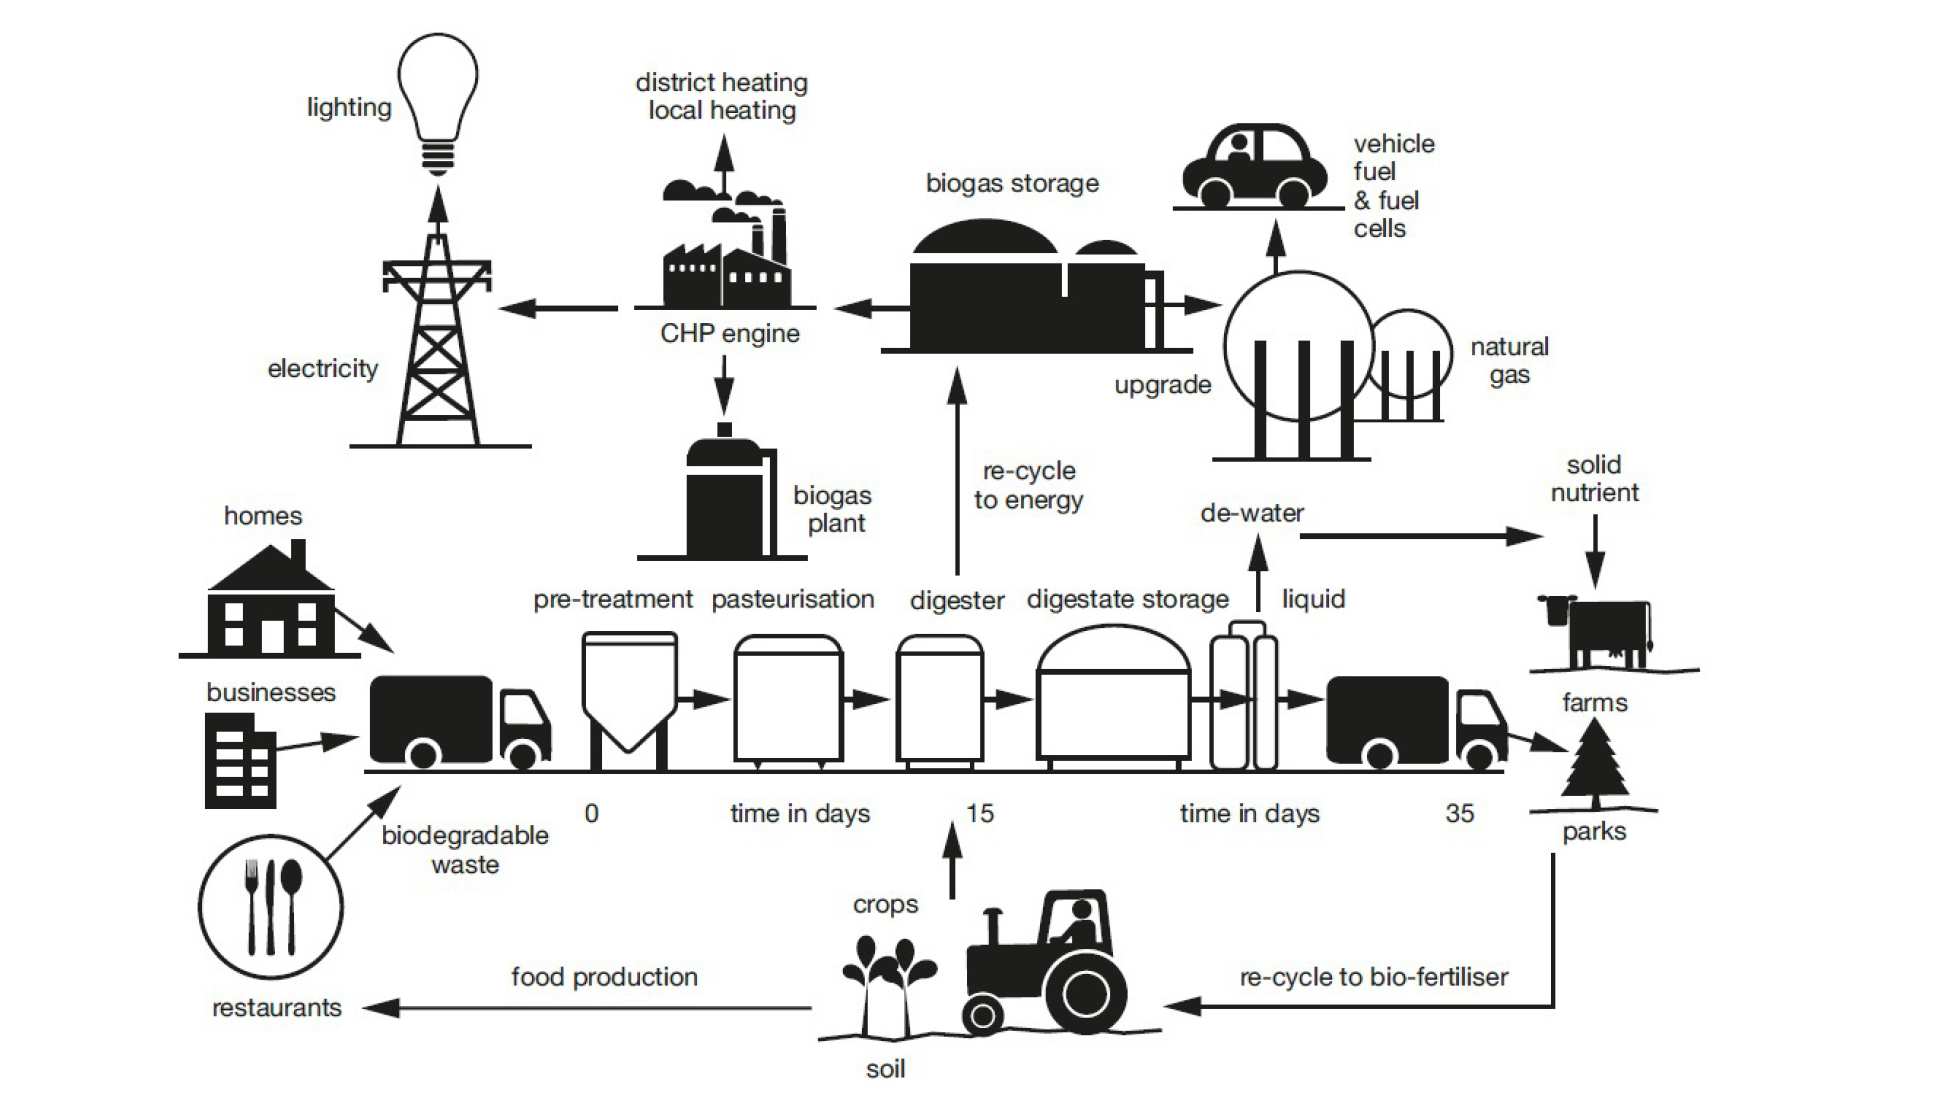 Figure 5: Anaerobic digestion as part of food waste's life cycle